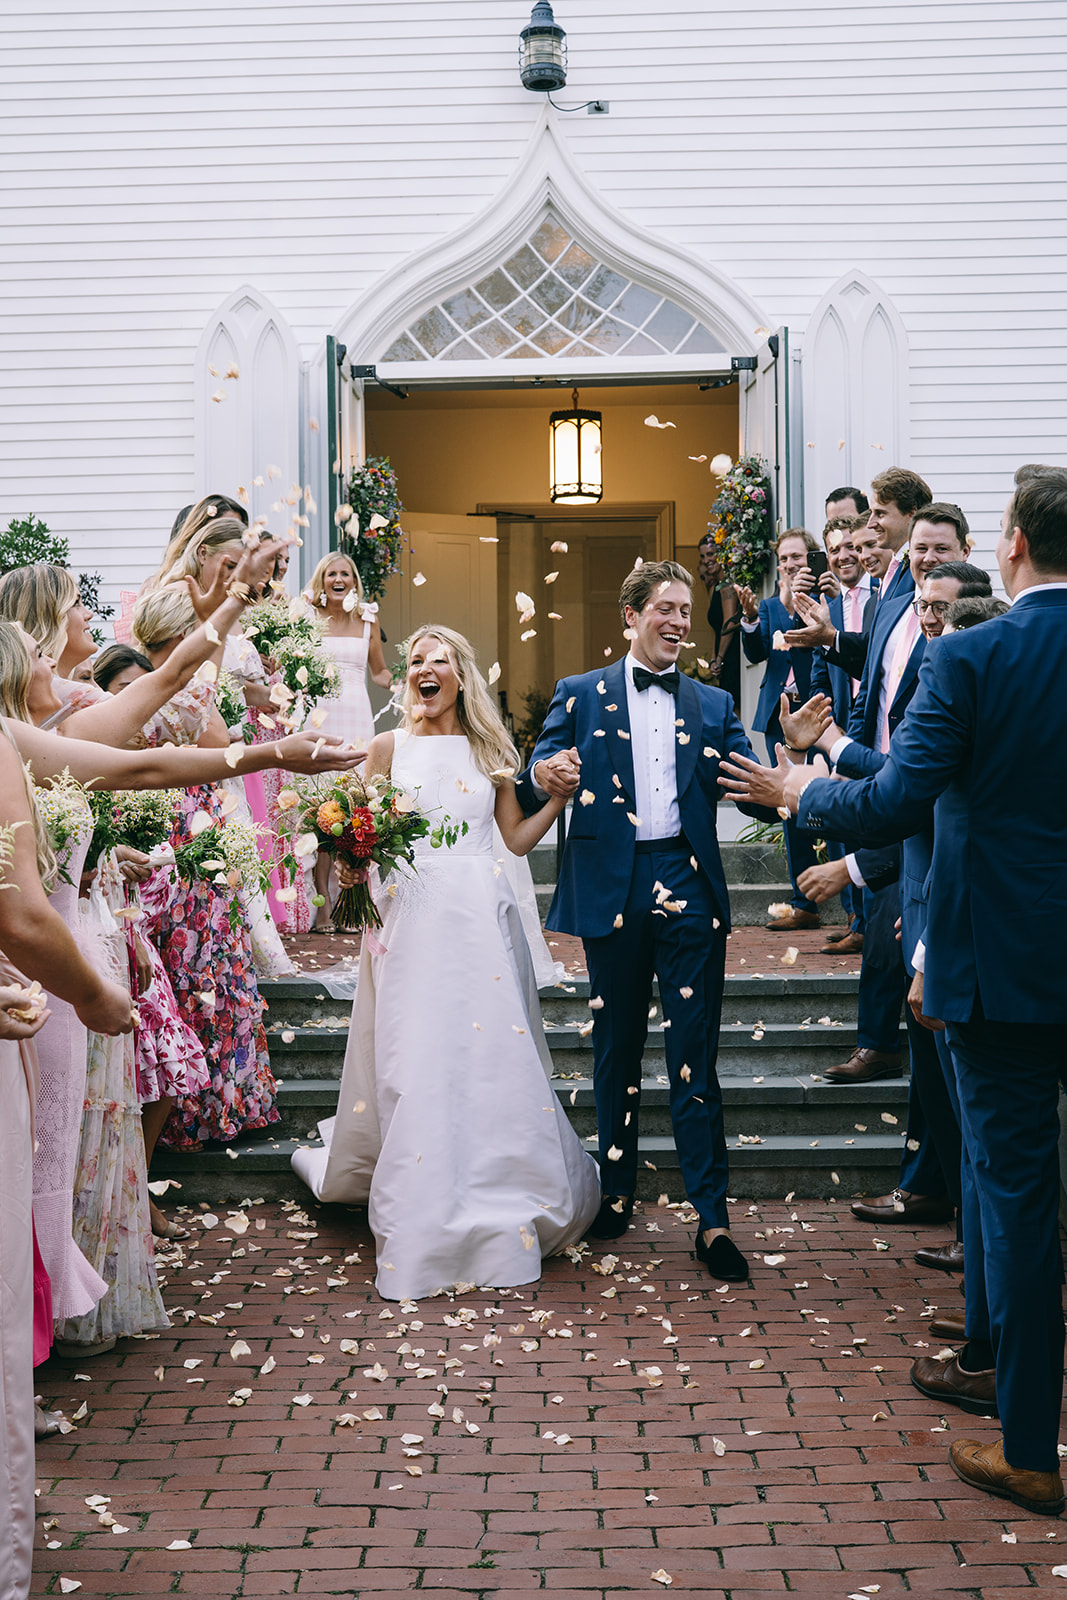 Woman in white dress and man in blue suit leaving church as people in colorful outfits shower them with flower petals